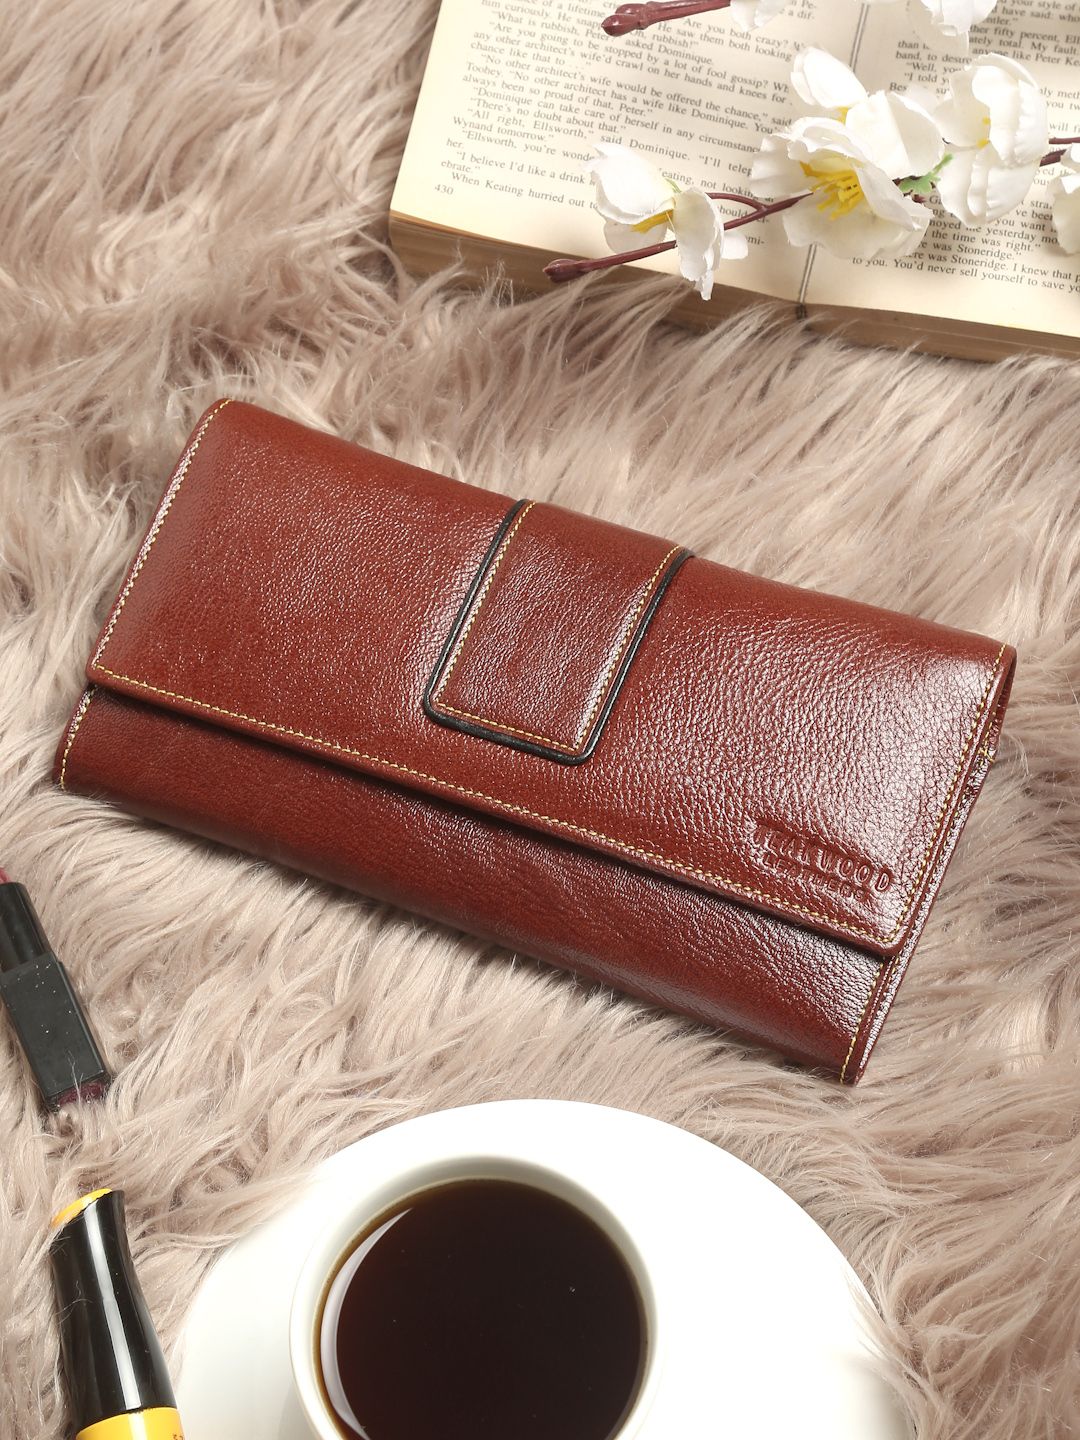 Leather Crossbody Purse in Tan Colorblock from HumanKind - HumanKind Fair  Trade